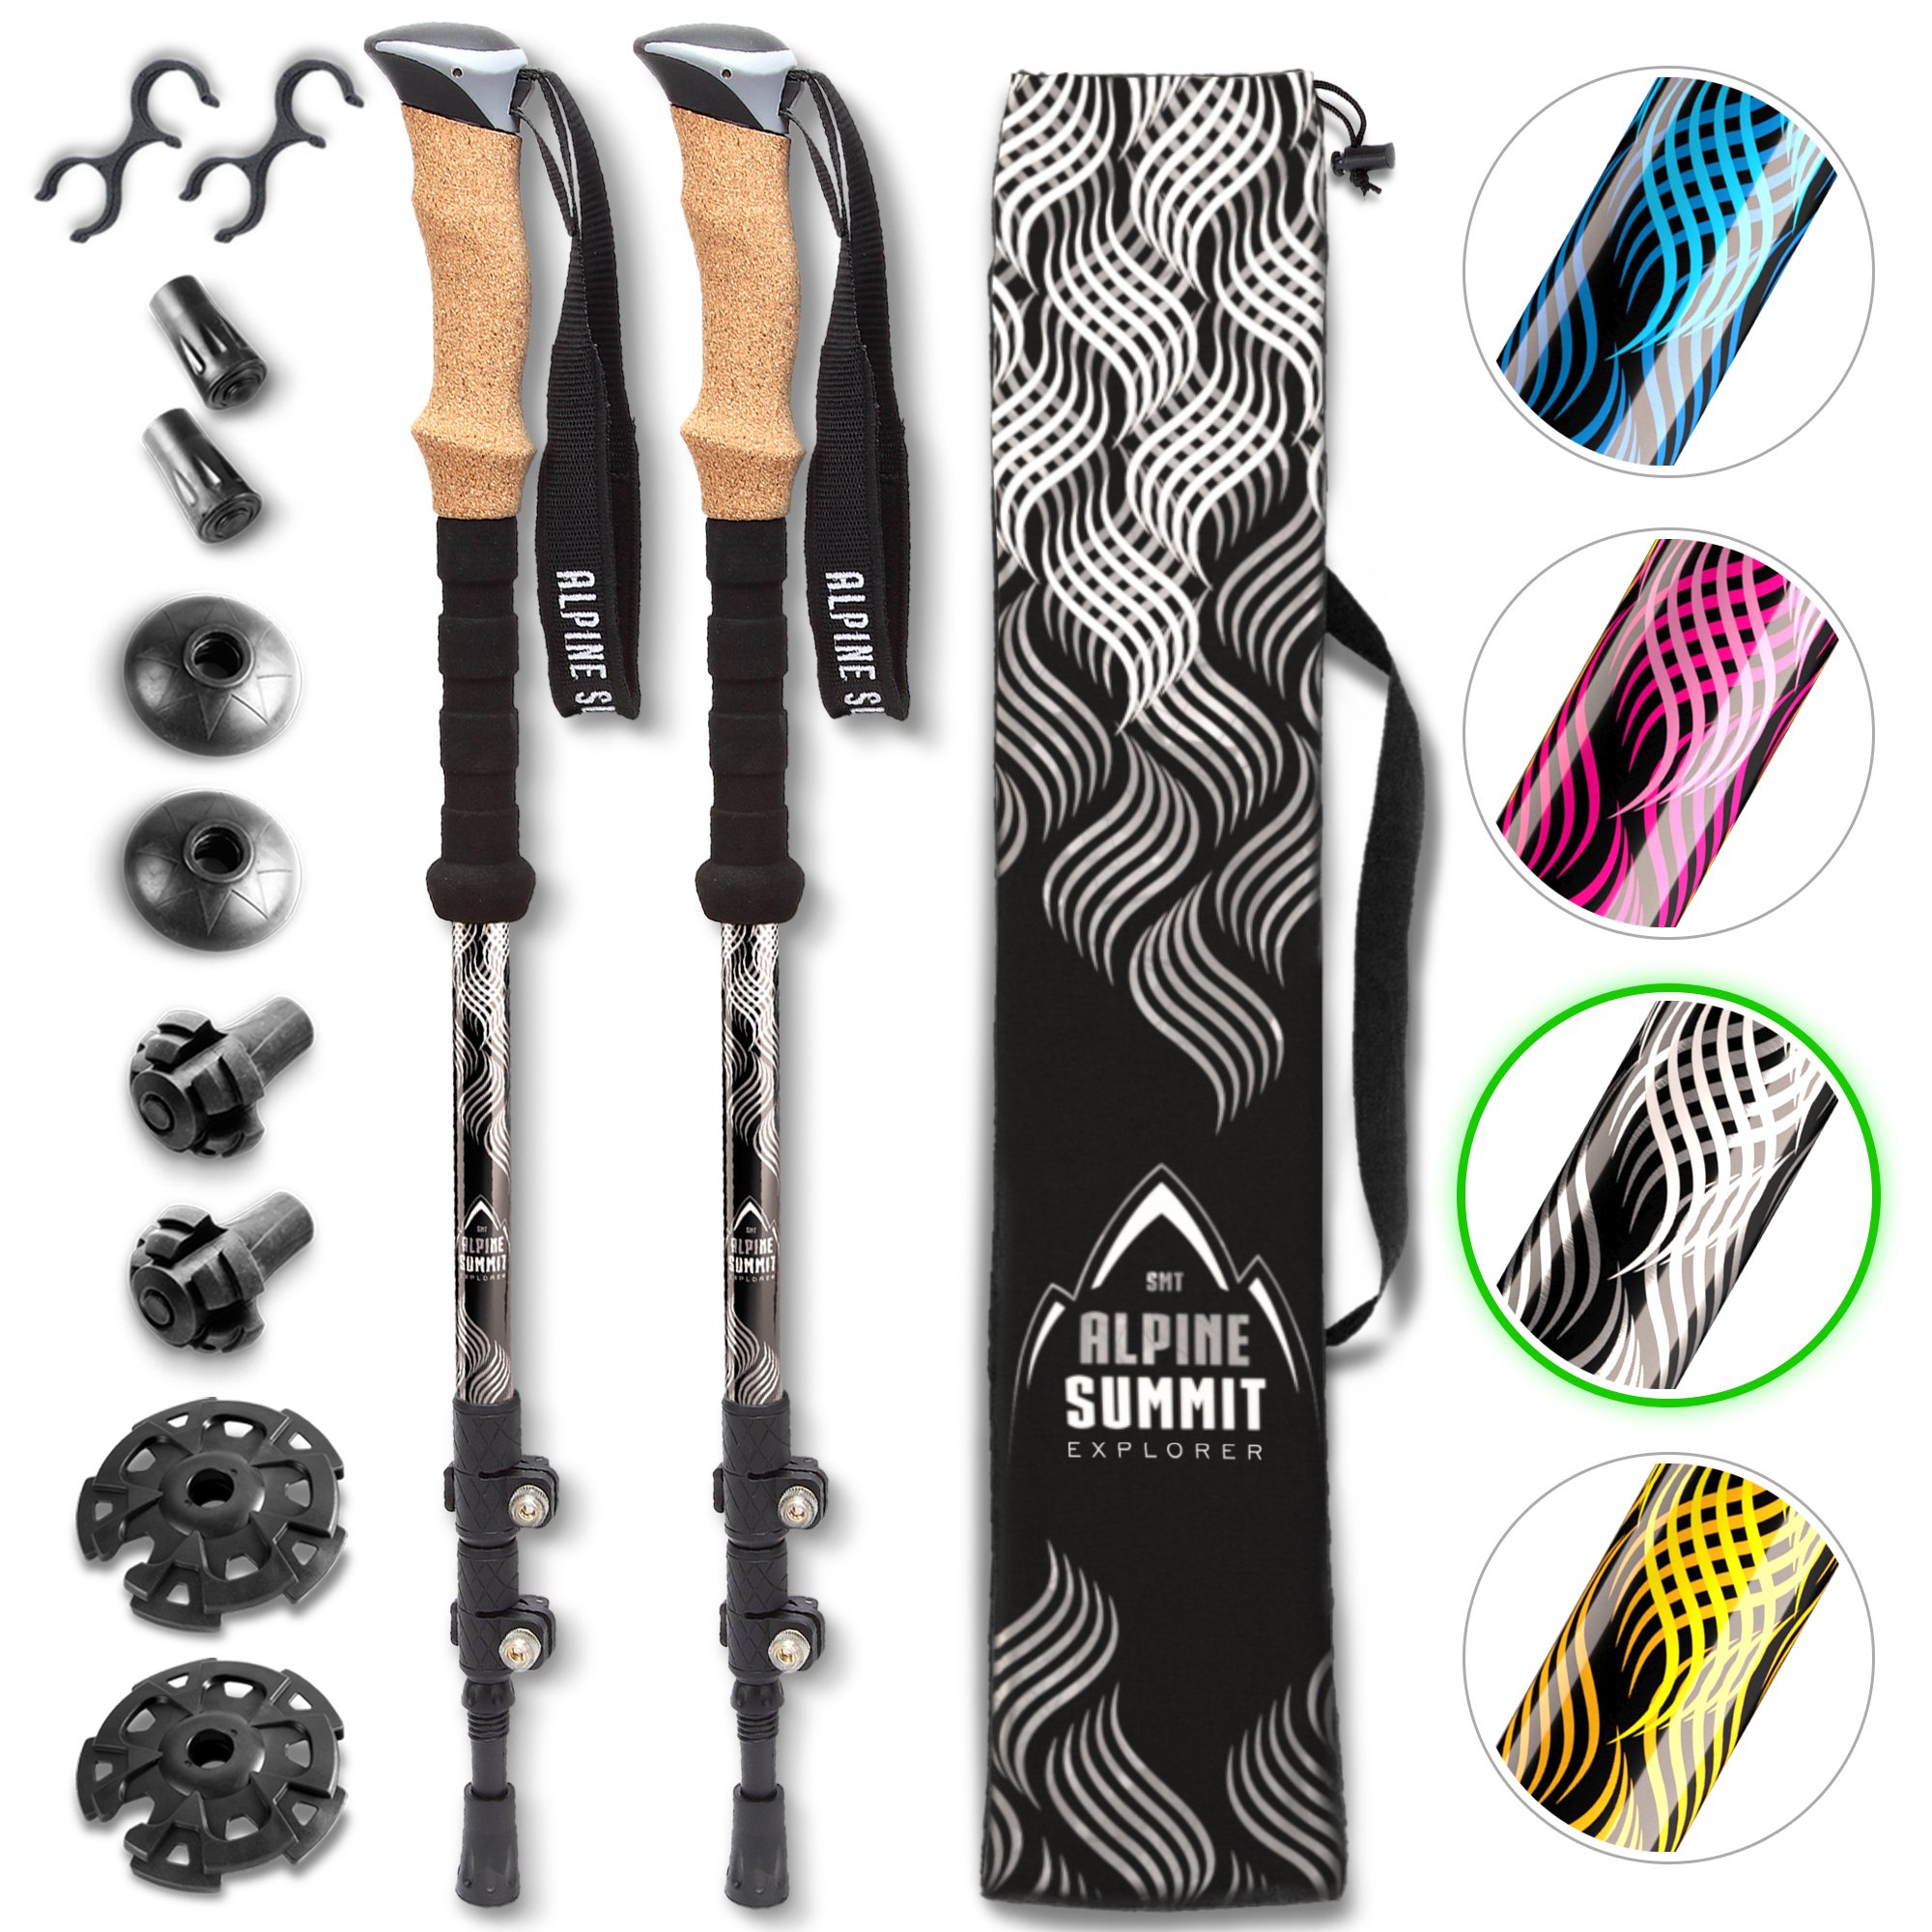 Alpine Summit Hiking/Trekking Poles with Quick Locks, Walking Sticks with Strong and Lightweight 7075 Aluminum and Cork Grips - Enjoy The Great Outdoors - image 1 of 7